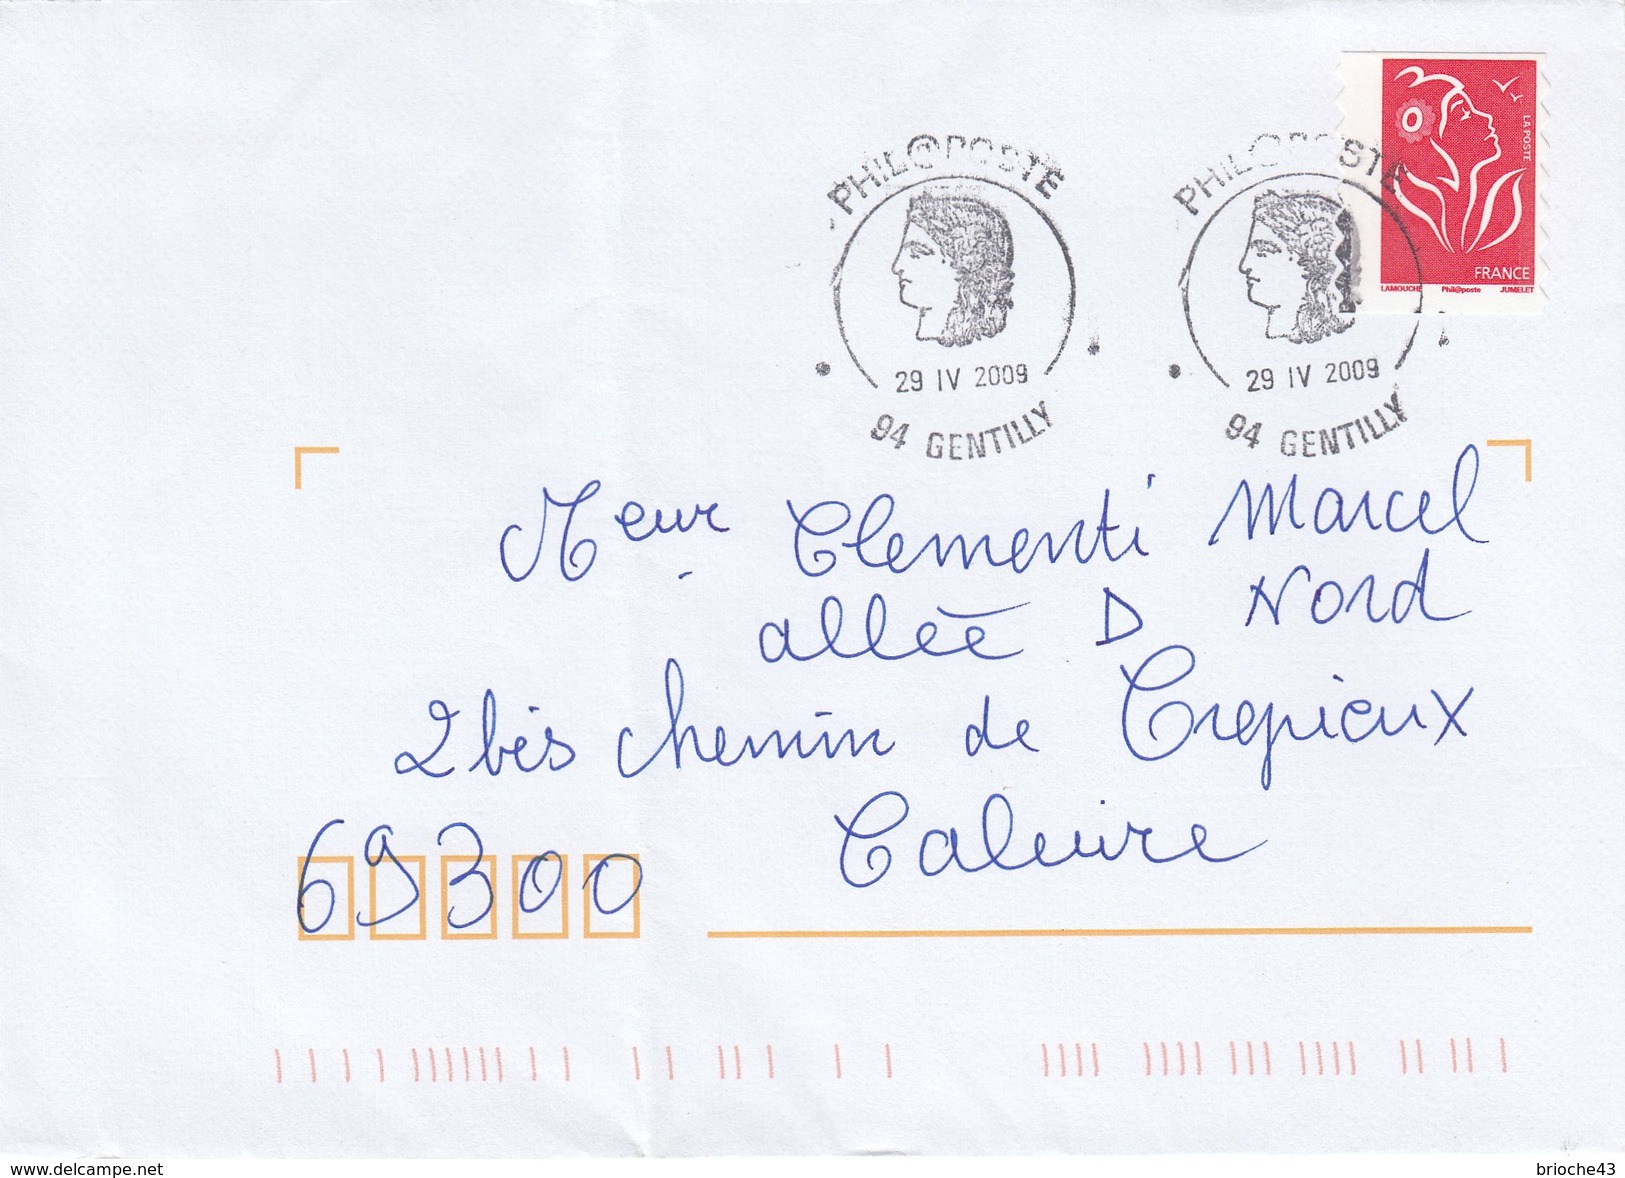 FRANCE - LETTRE PHIL@POSTE 29 IV 2009 GENTILLY - MARIANNE DE LAMOUCHE ADHESIF - 2004-2008 Marianne Of Lamouche